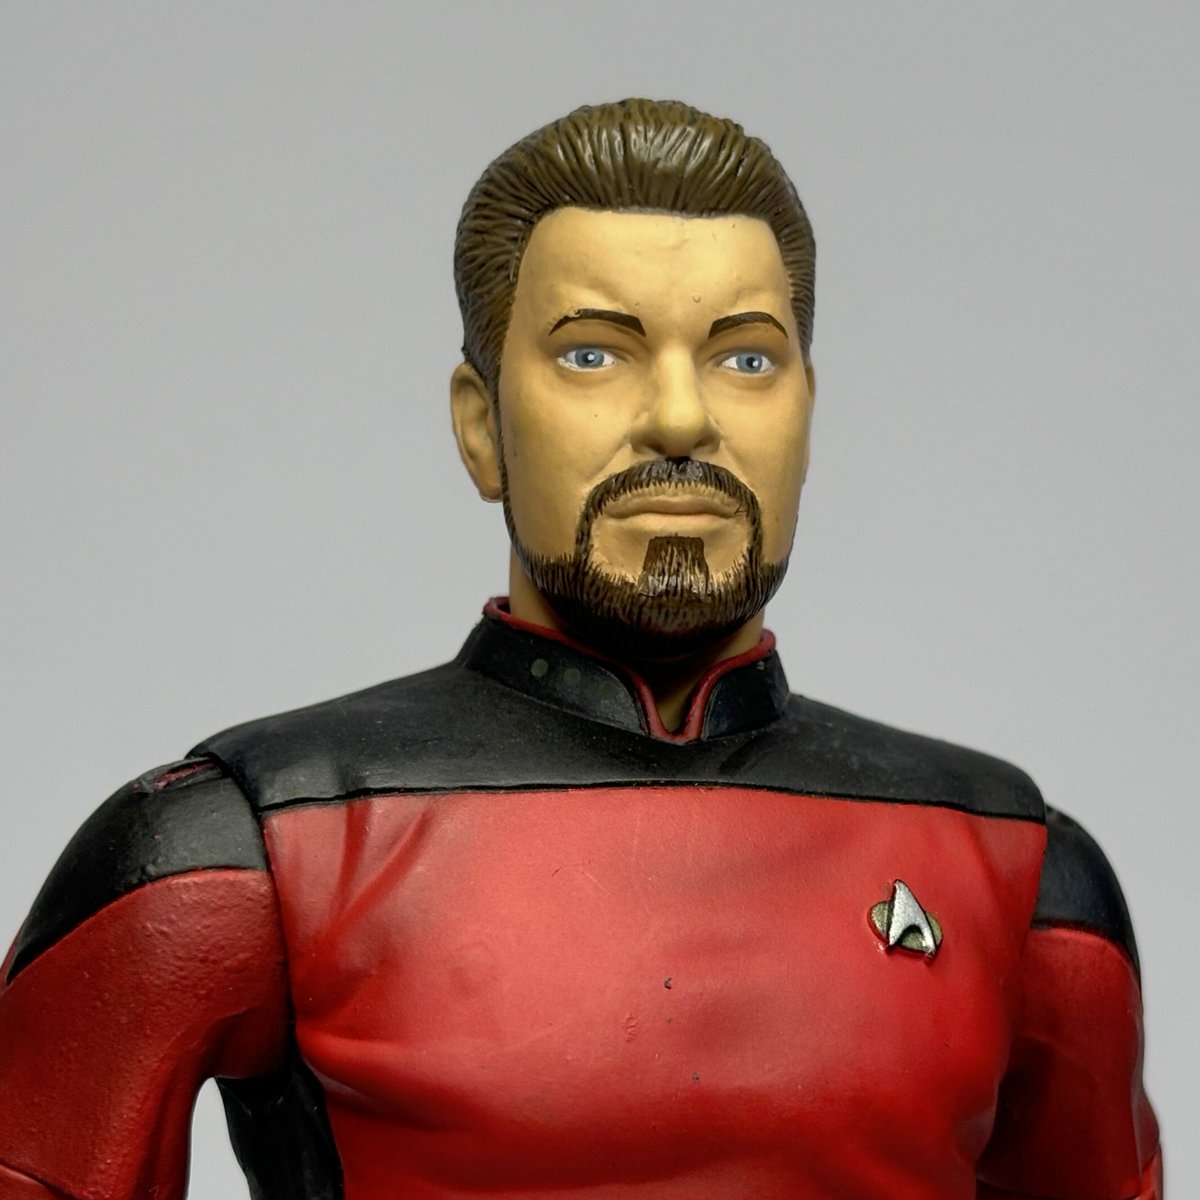 Comparing Rikers: Star Trek The Next Generation figures from Super 7 (2023) and Art Asylum (2006).  Gains in some areas and deficiencies in others.  What do you think?  #StarTrekTNG #startrektoys #actionfigure #jonathanfrakes #Riker #AllStarTrek